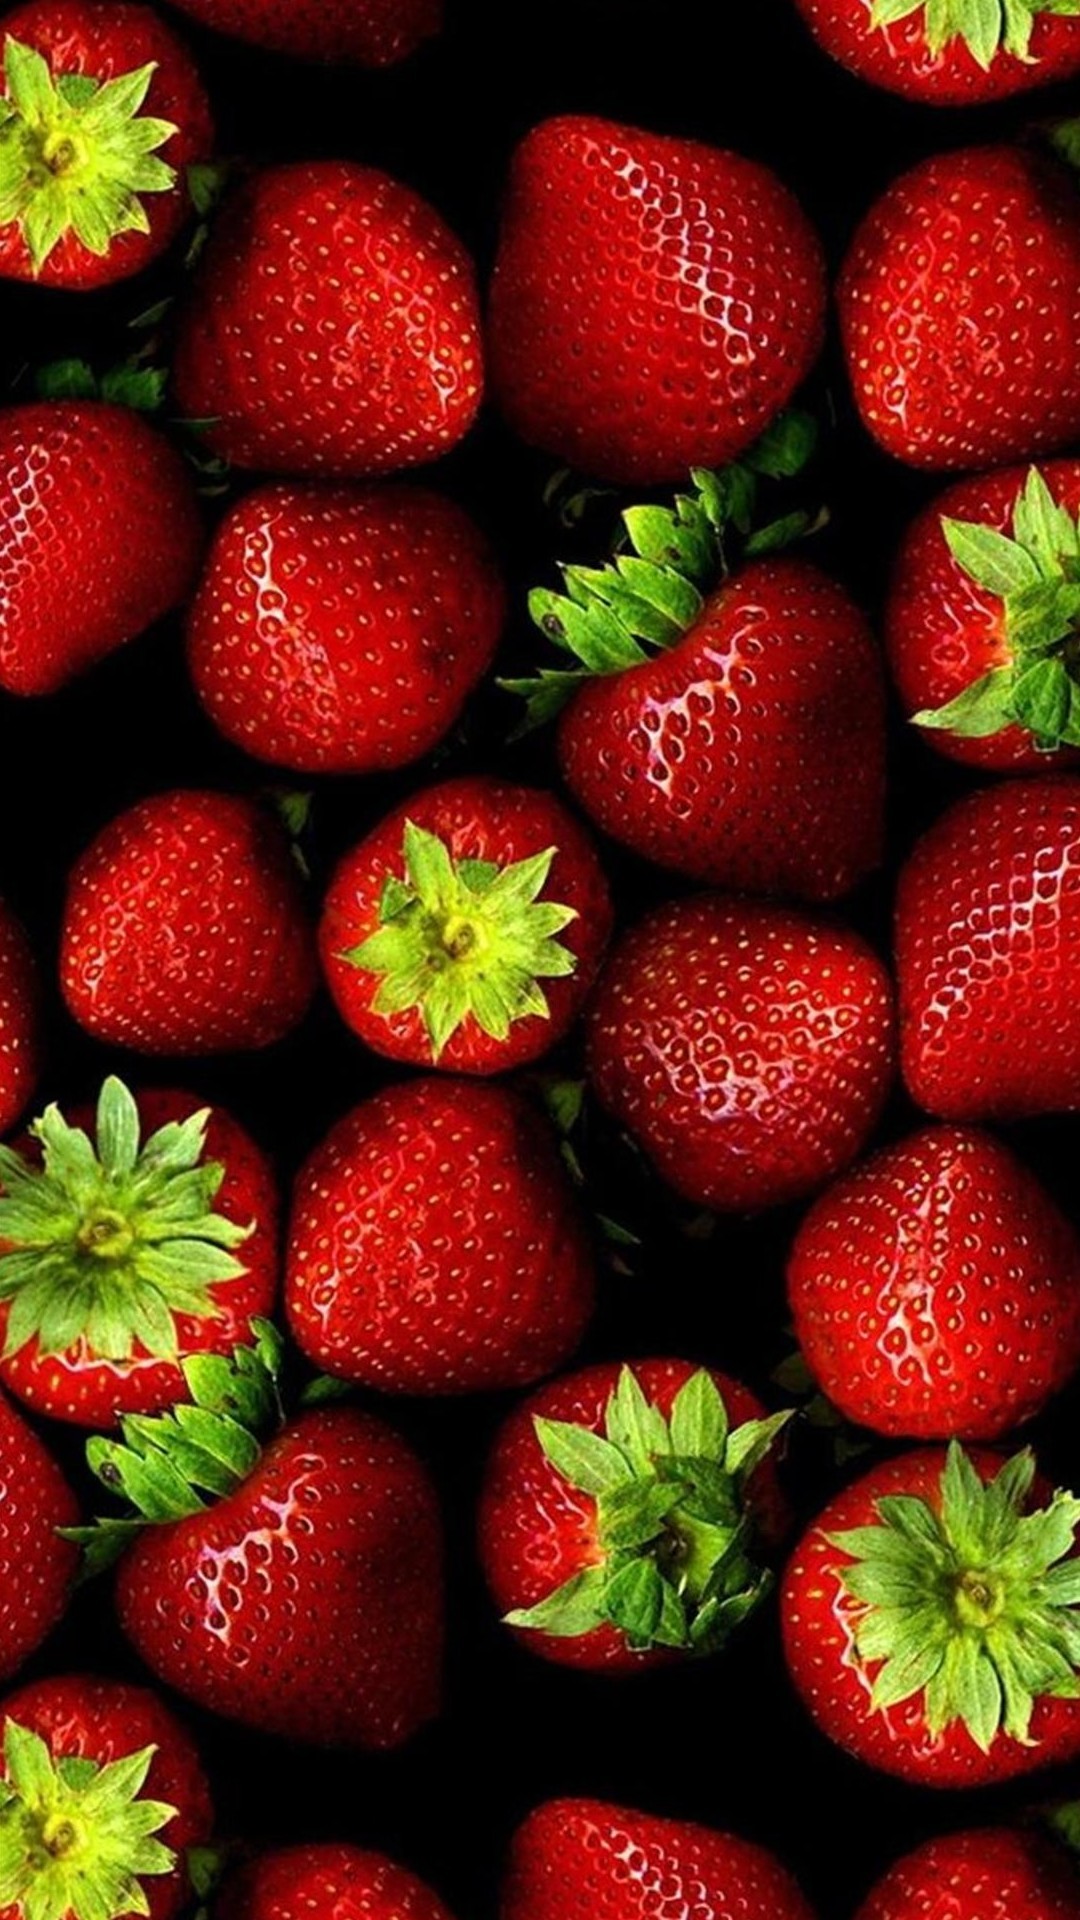 1080x1920 ... fruit lg g2 wallpapers hd 90 lg g2 wallpapers lg wallpapers ...